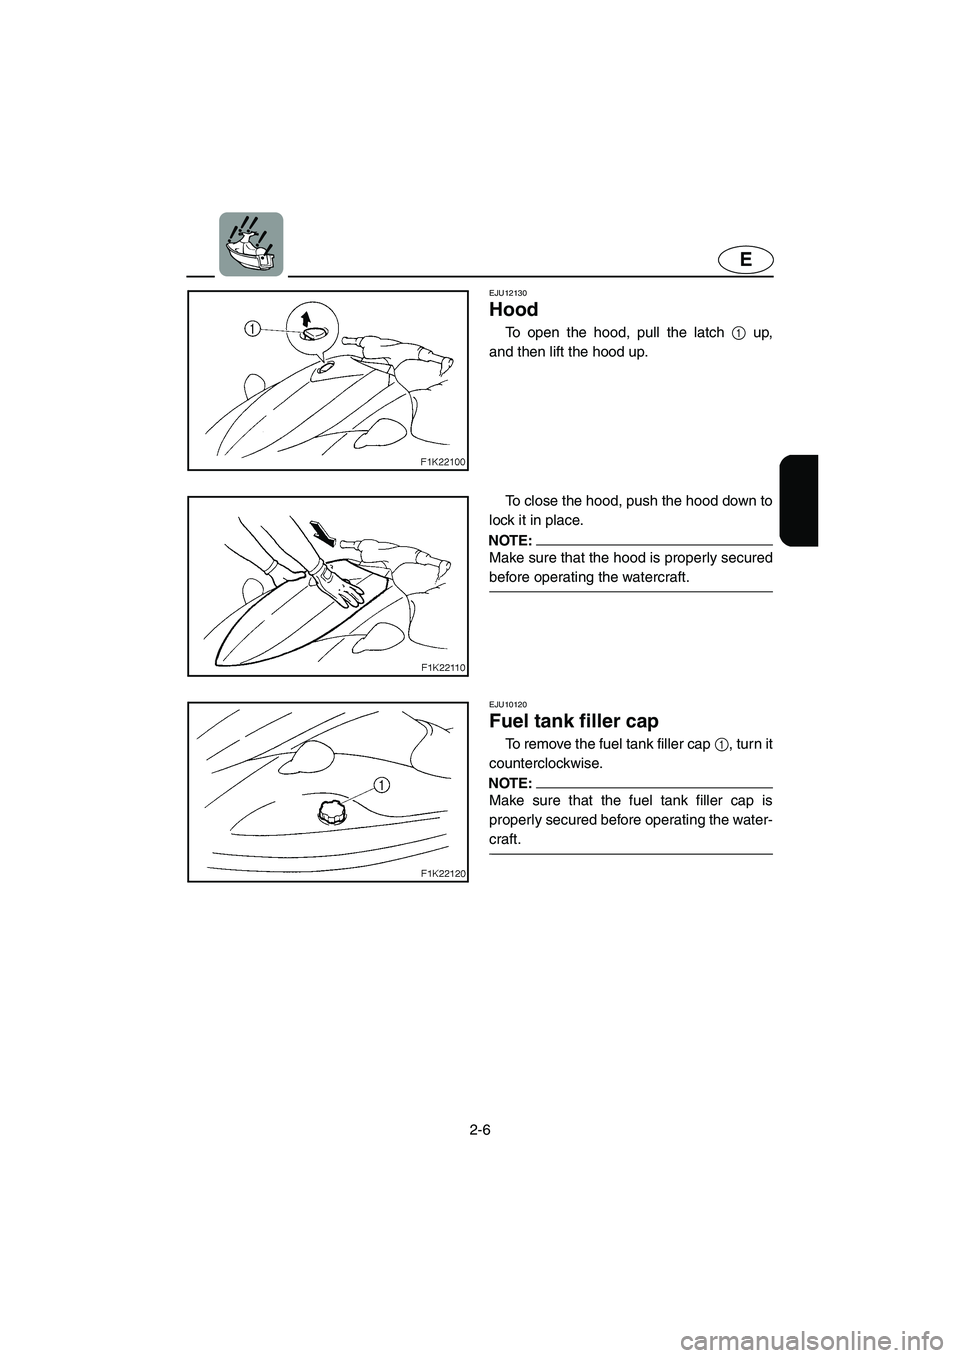 YAMAHA VX CRUISER 2006  Owners Manual 2-6
E
EJU12130 
Hood  
To open the hood, pull the latch 1 up,
and then lift the hood up. 
To close the hood, push the hood down to
lock it in place. 
NOTE:@ Make sure that the hood is properly secured